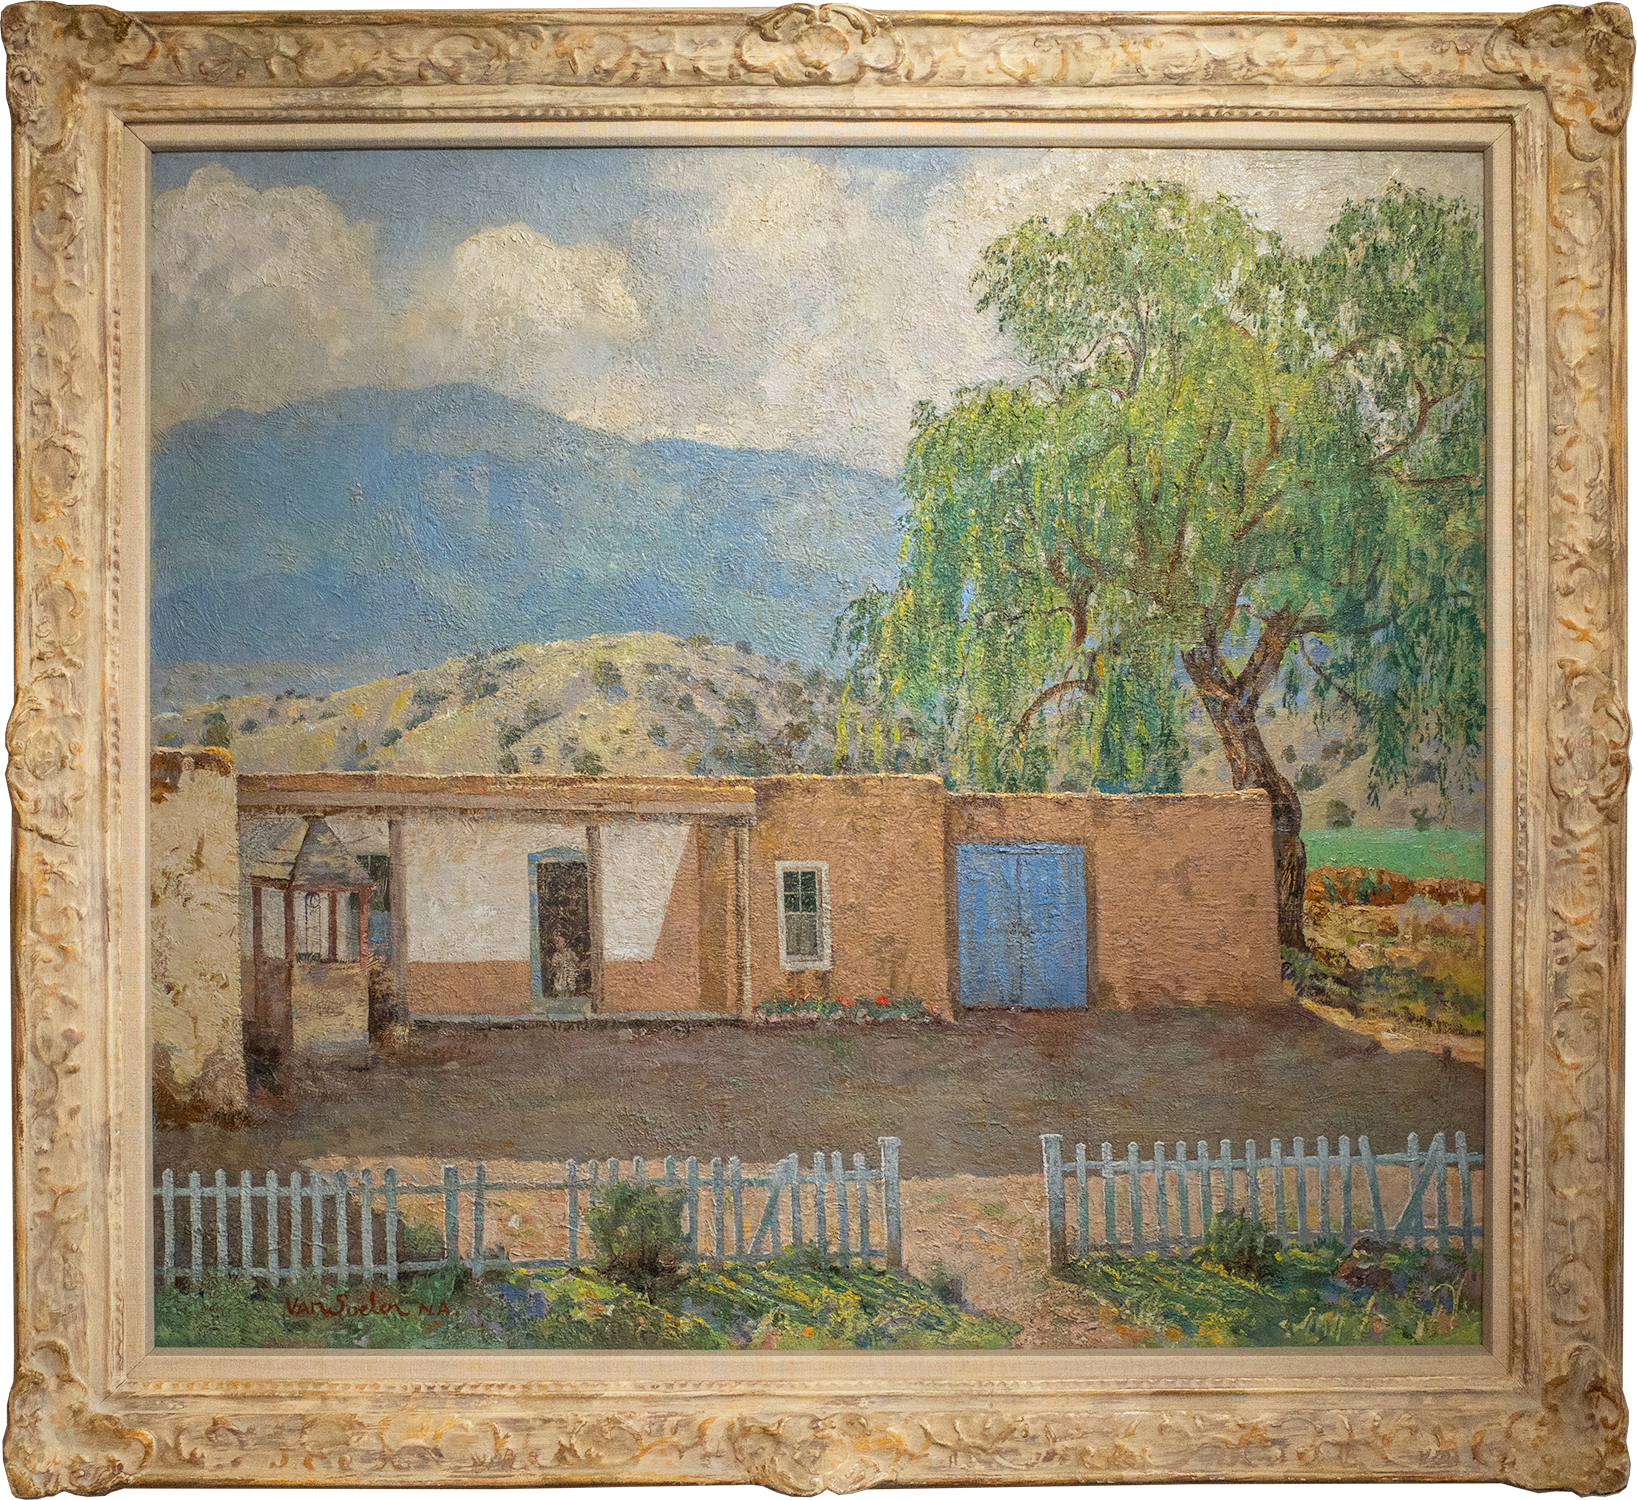 A textured oil painting of an adobe house with a blue door and a large green tree to the side, set against a backdrop of hills under a cloudy sky, encased in an ornate gold frame. Title: Old Las Vegas Highway Home.